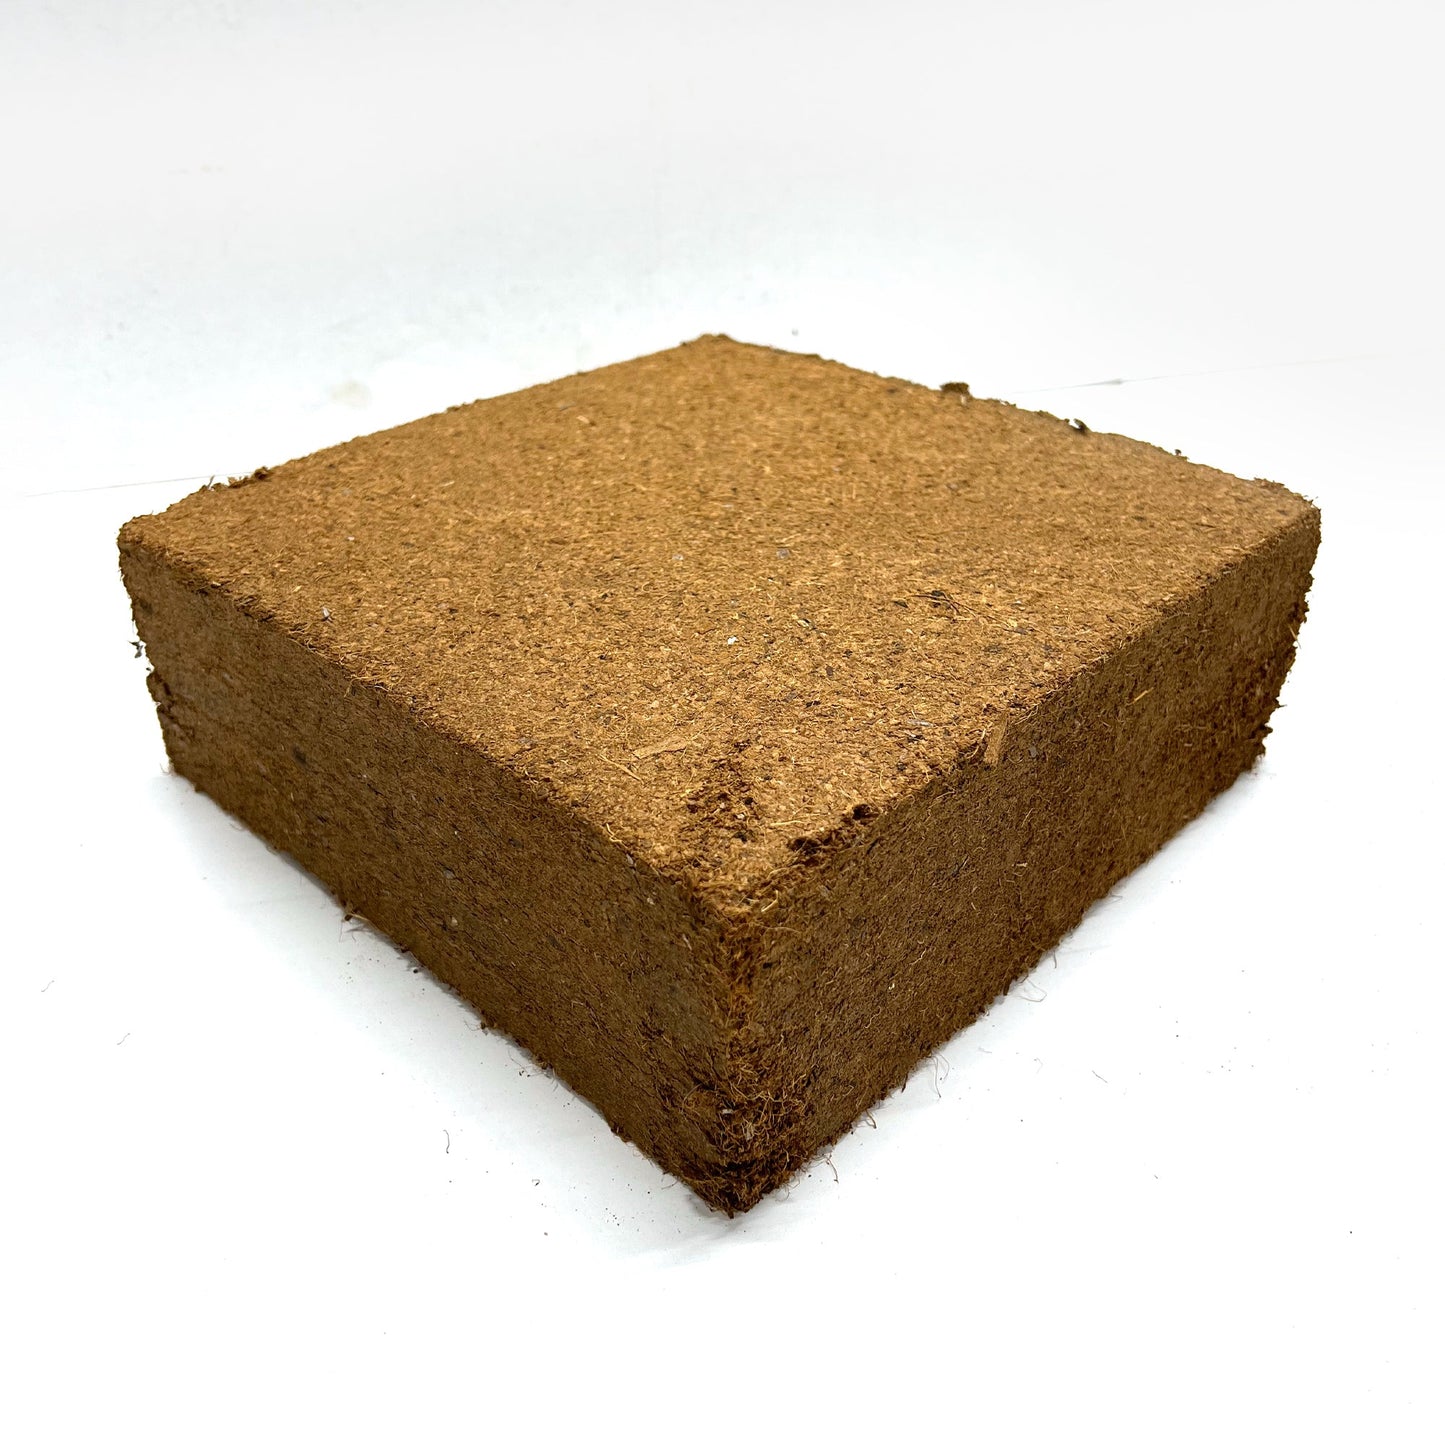 Pack of 100, Best Coco Peat - Premium Coir Pith 5Kg/11 Lbs Block, Expands to 15 Gallon, Low EC